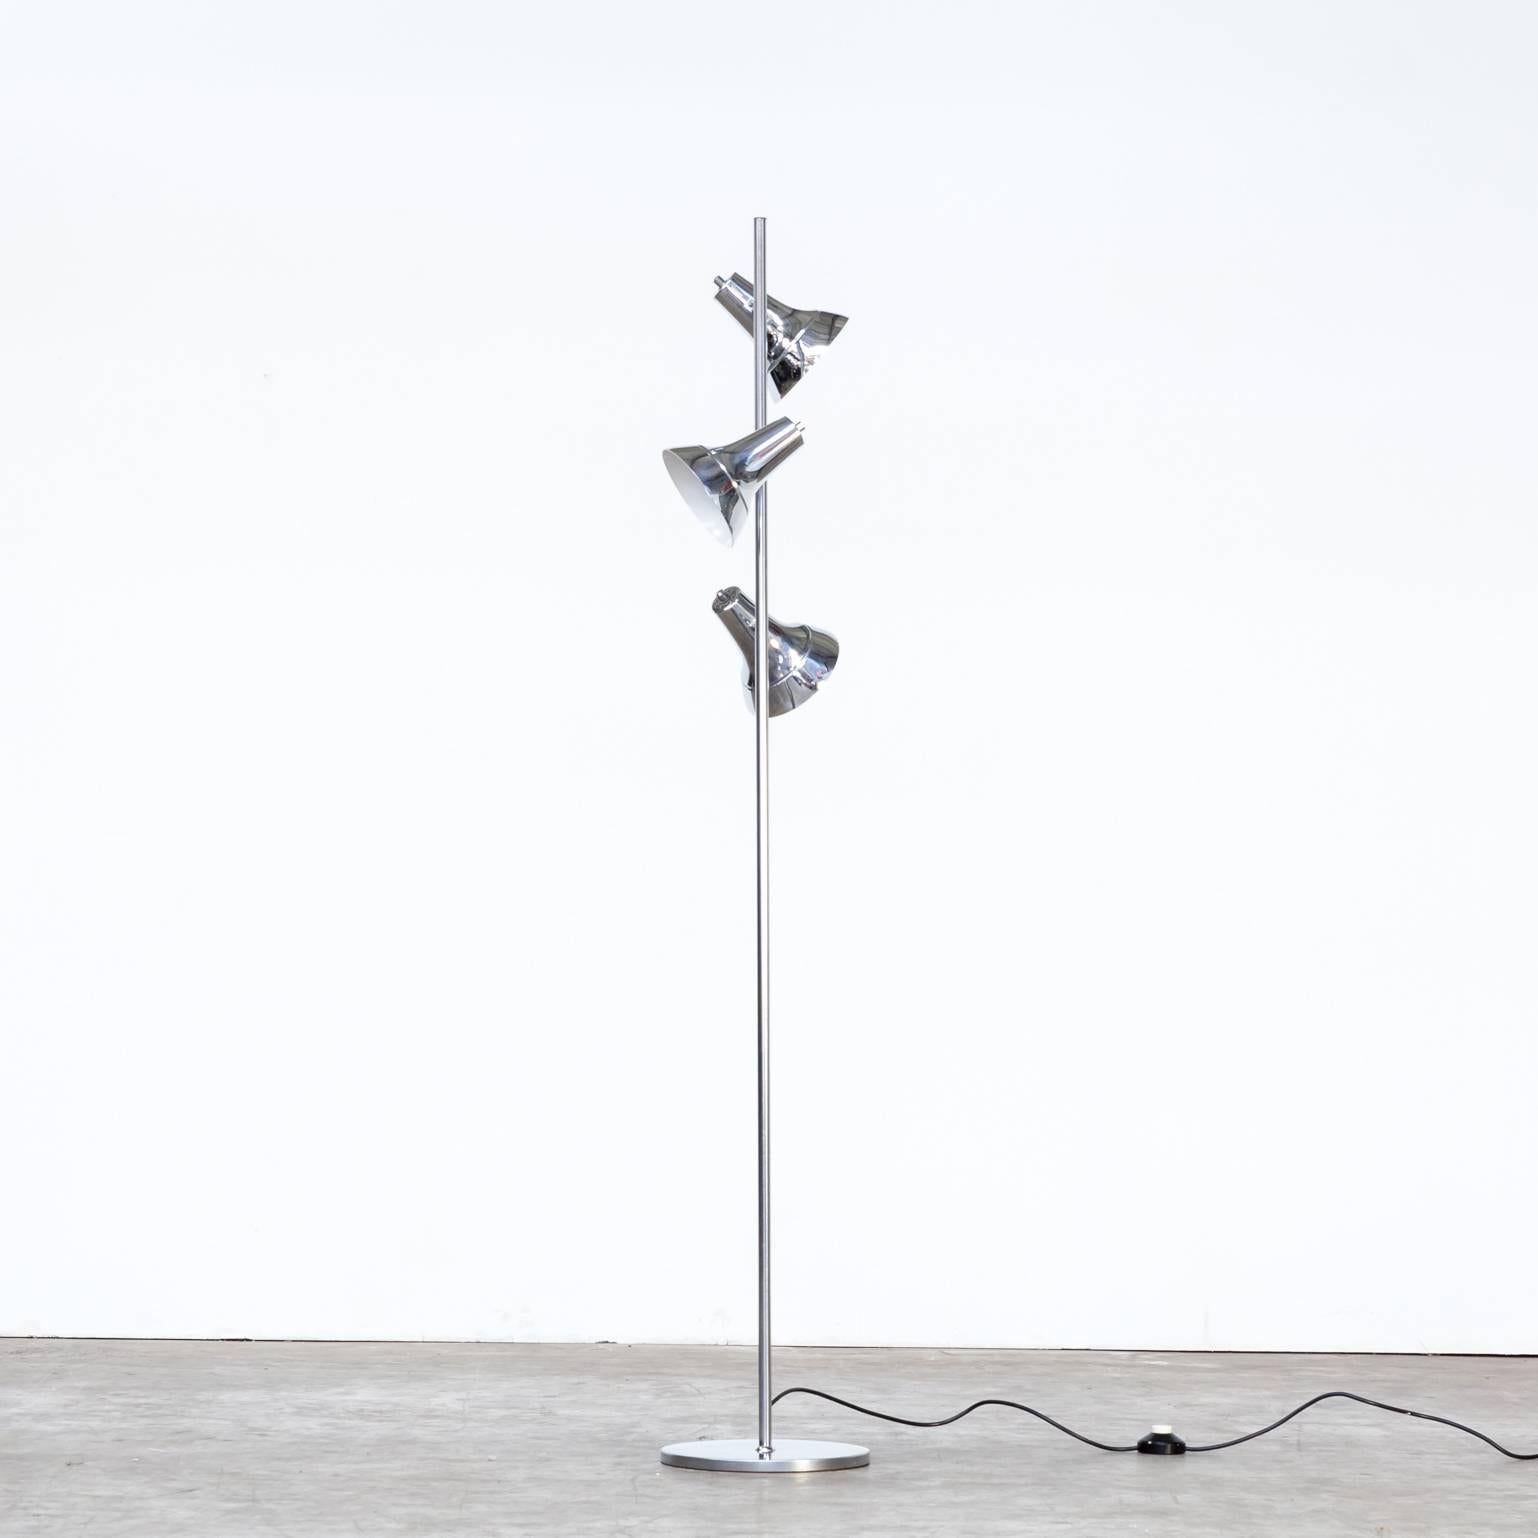 Late 20th century chrome floor lamp, three spots. Good condition consistent with age and use.